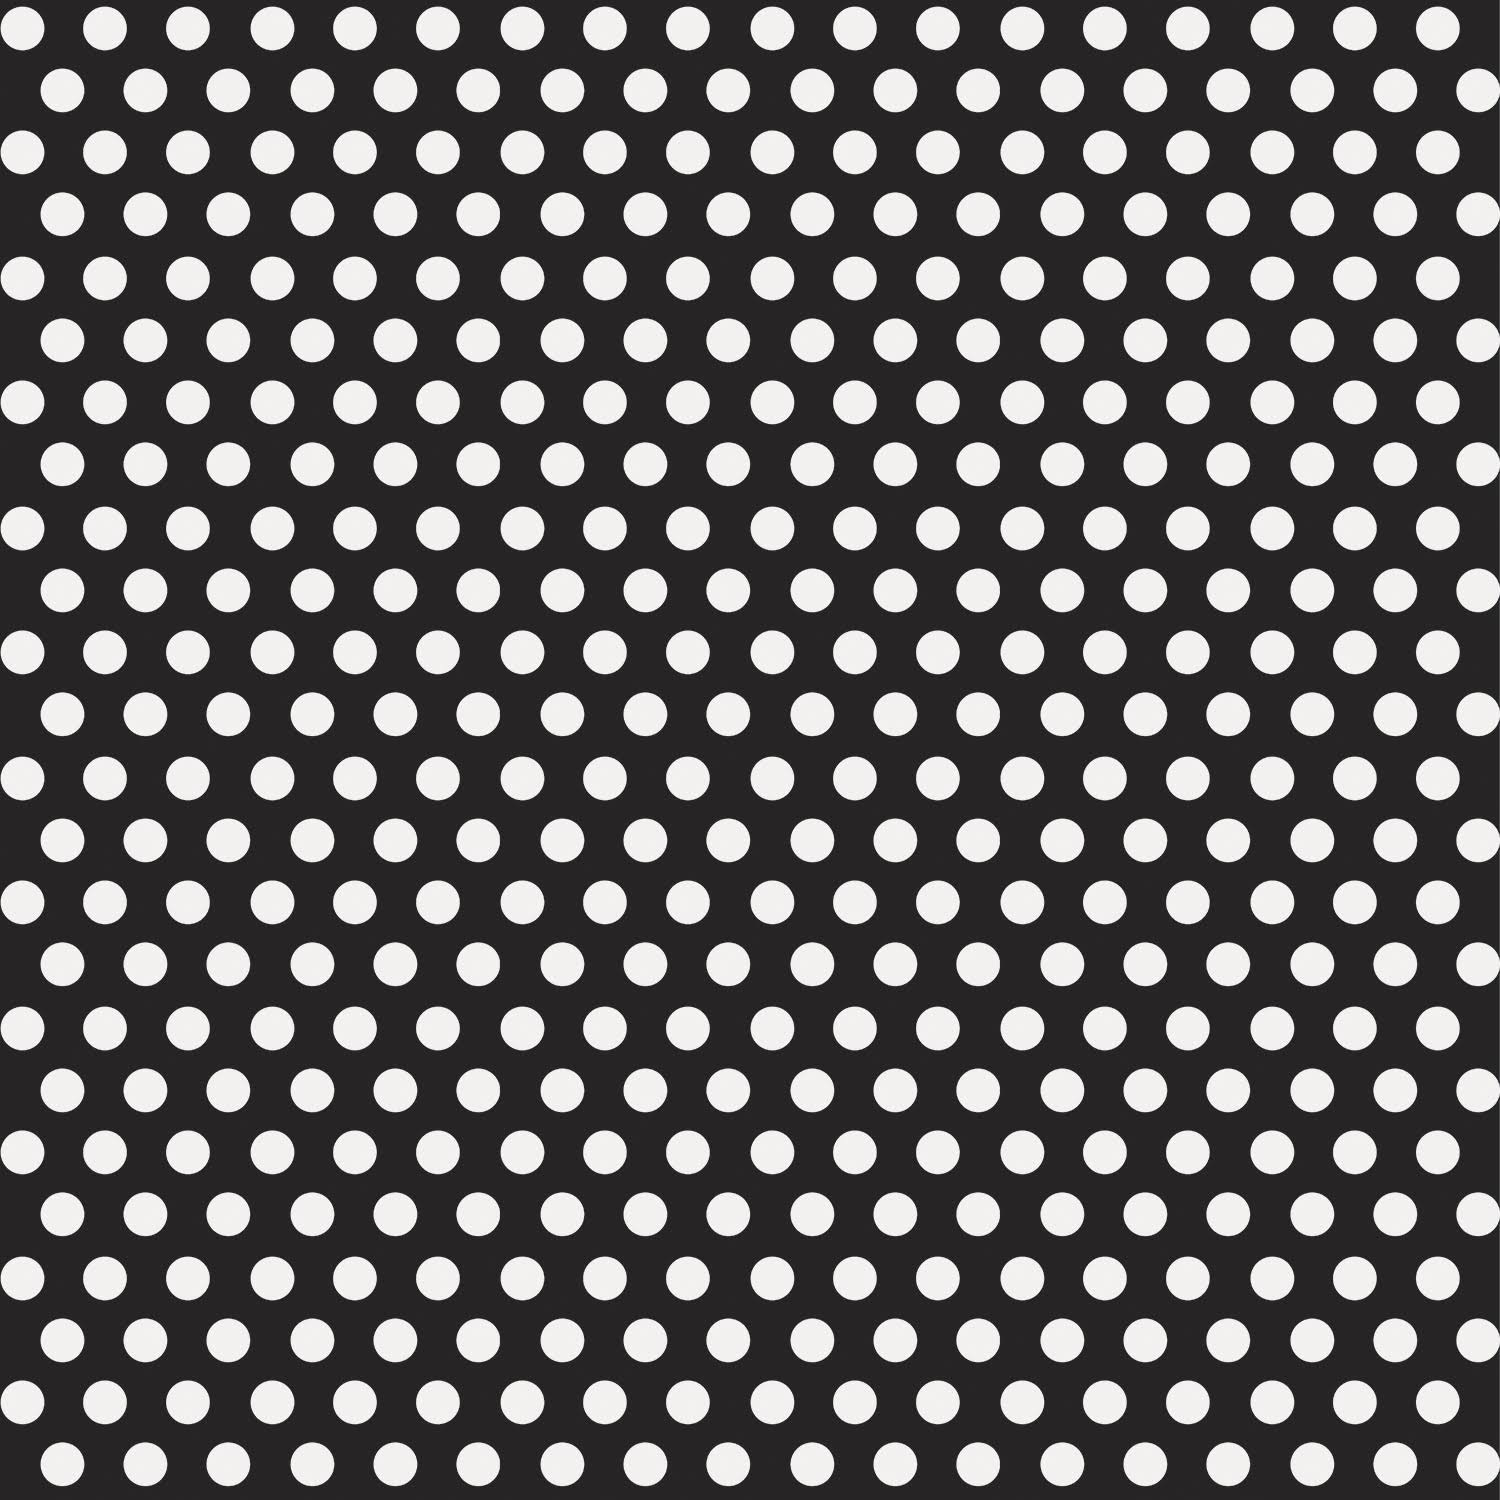 Unique Industries Polka Dot Wrapping Paper - Black